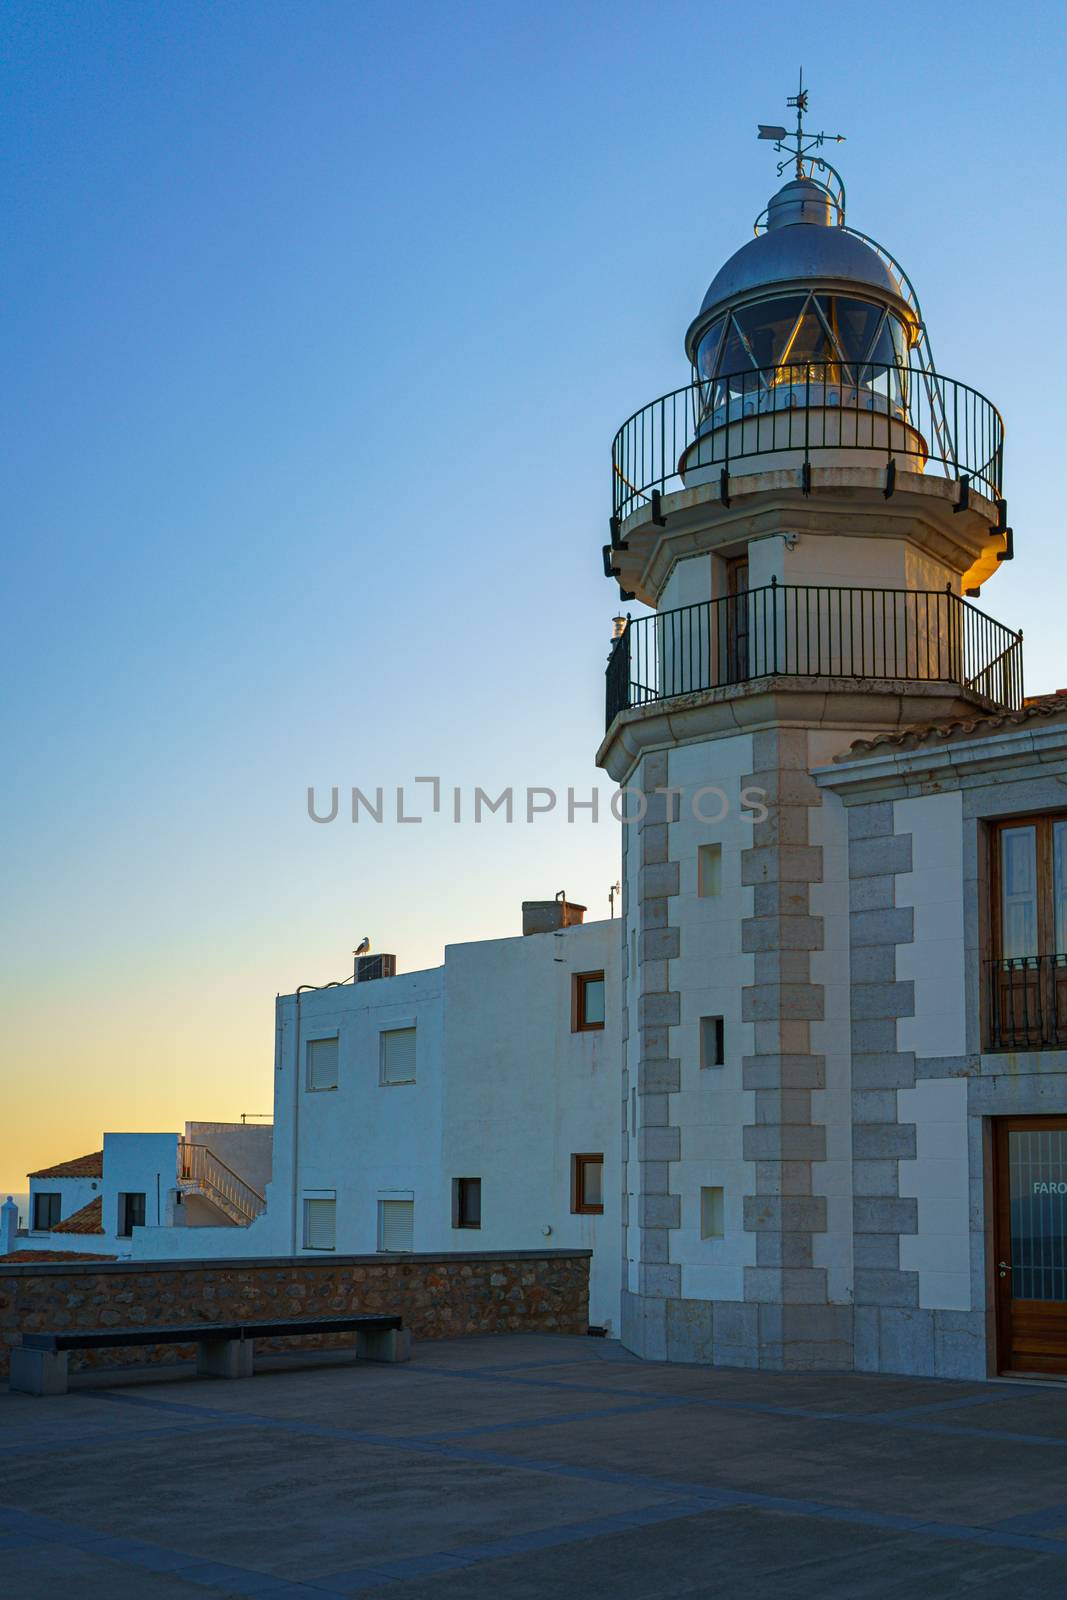 white lighthouse at sunset in the medieval and mediterranean town of Peniscola, Spain.